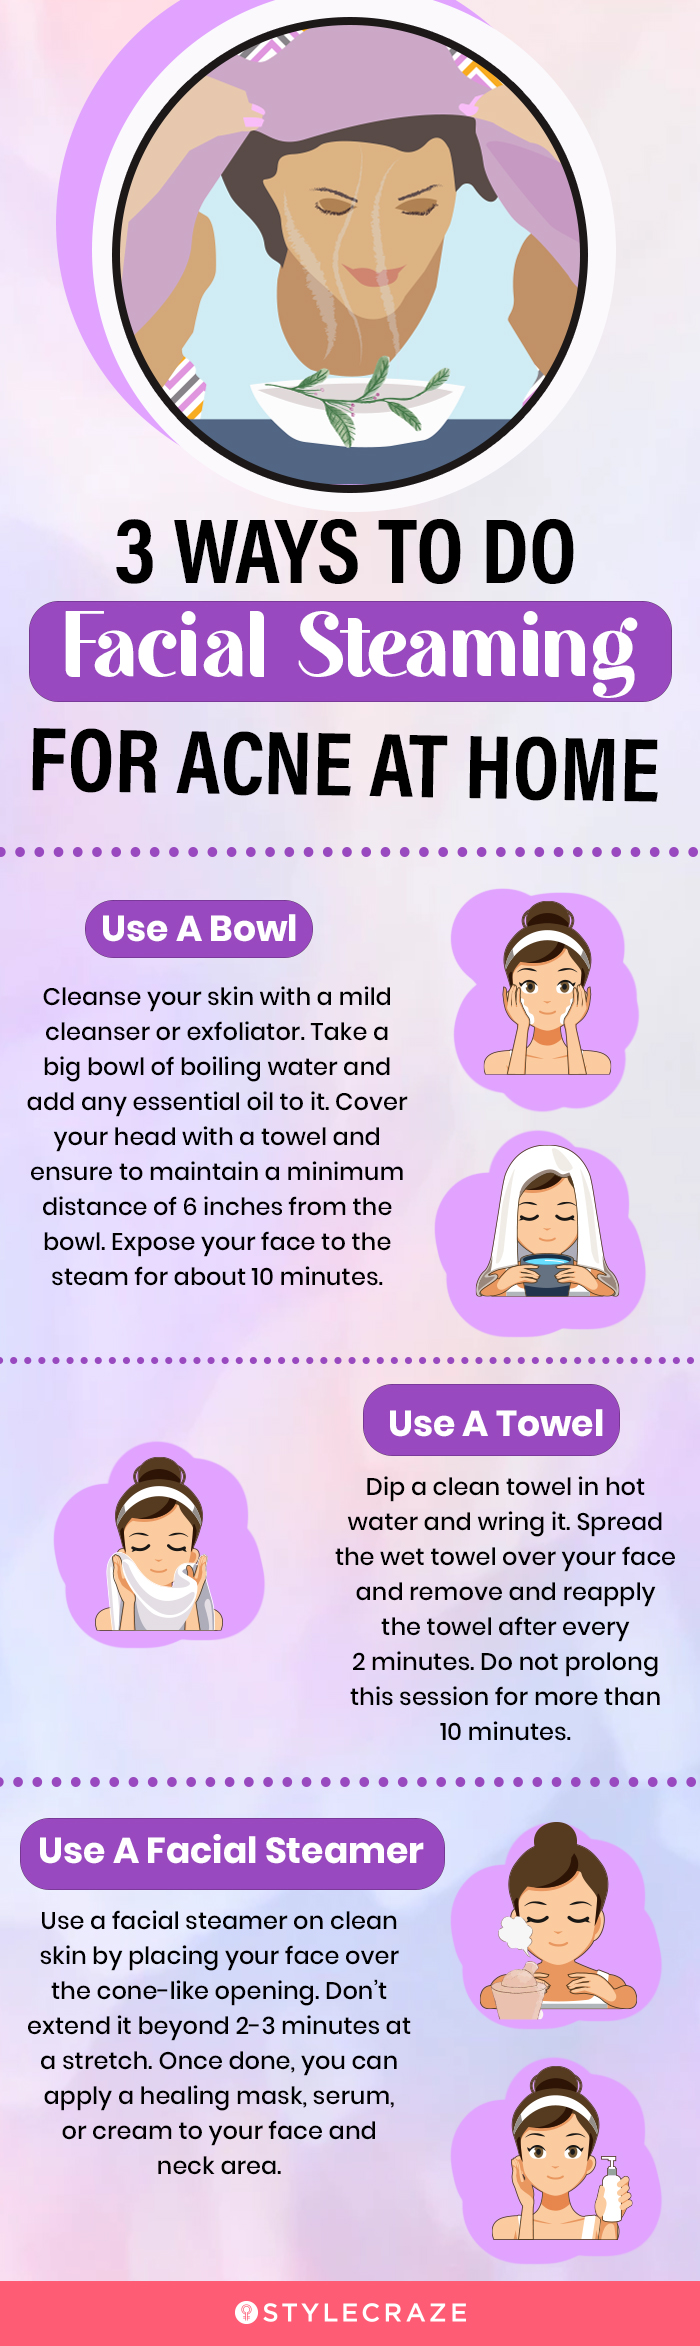 3 ways to do facial steaming for acne at home [infographic]